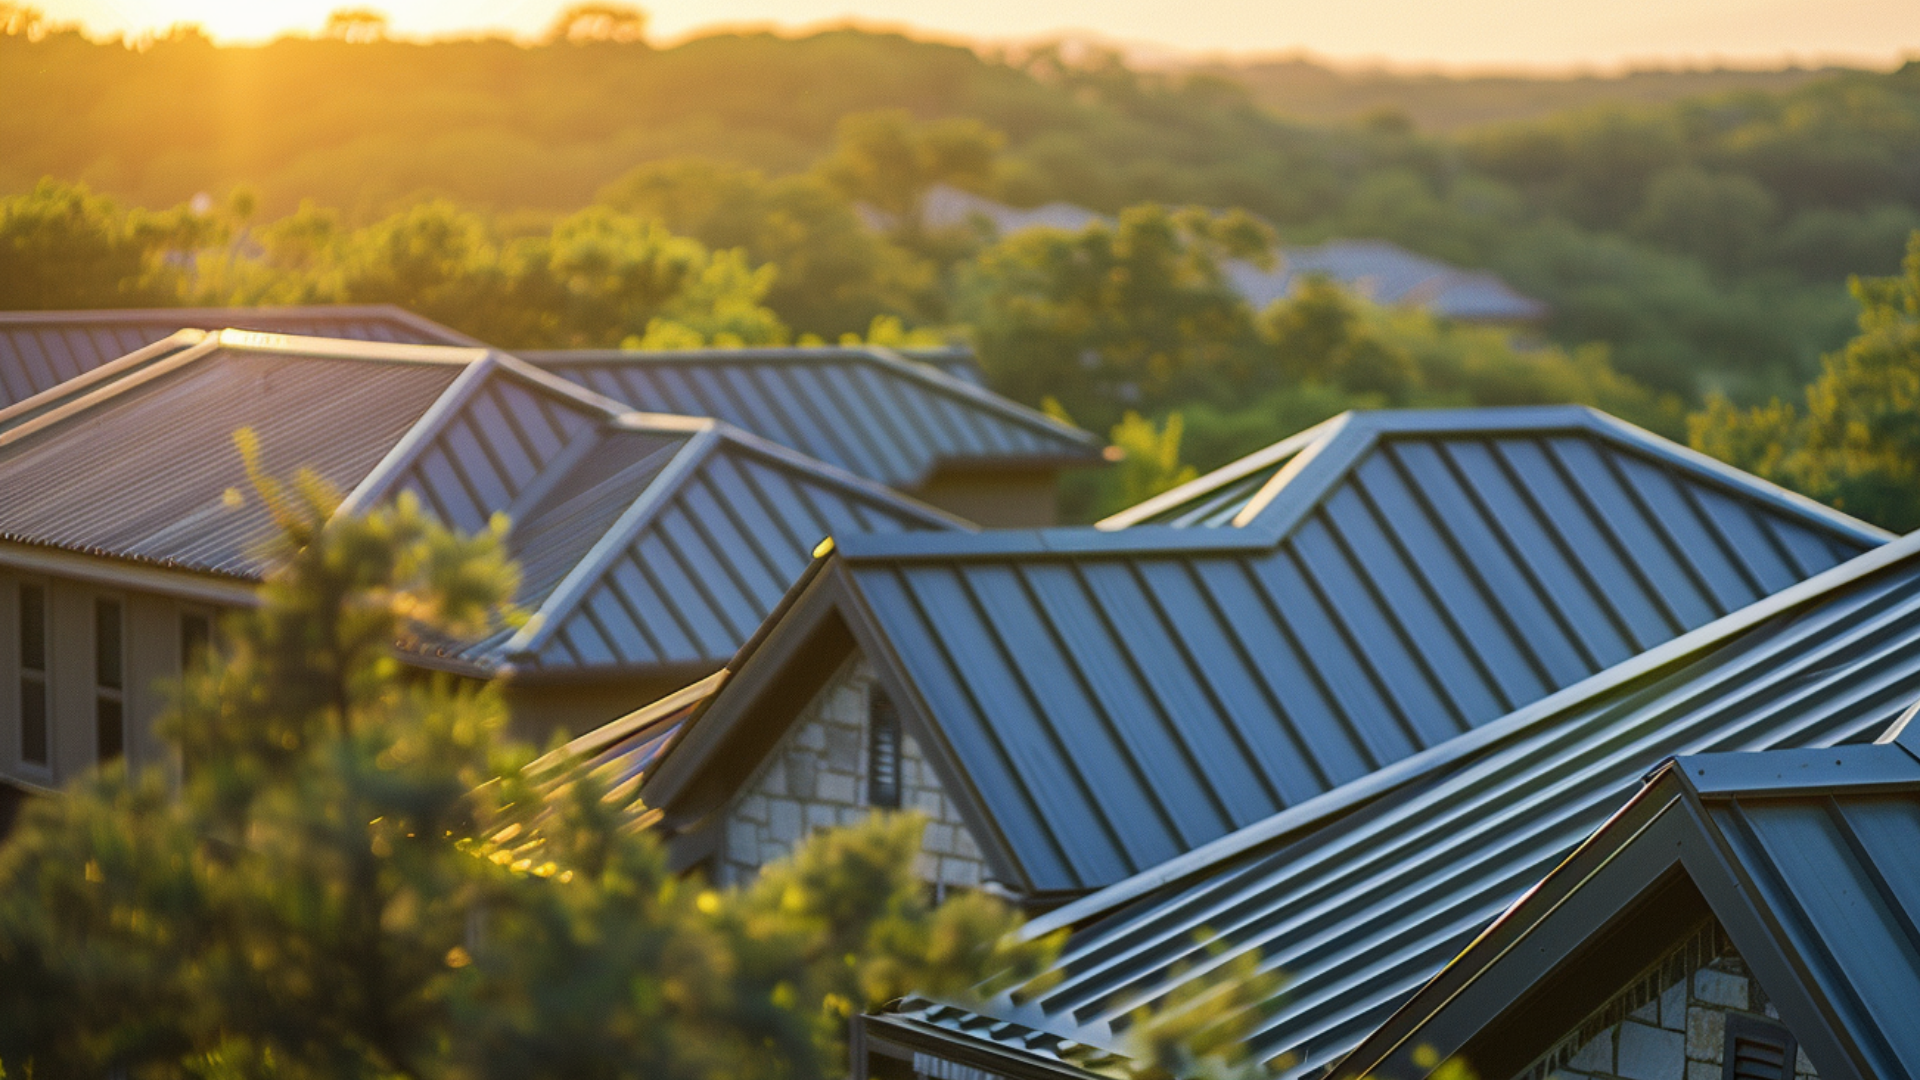 A premium metal steel roofing on Texas homes, greenery background, close-up, golden hour condition.